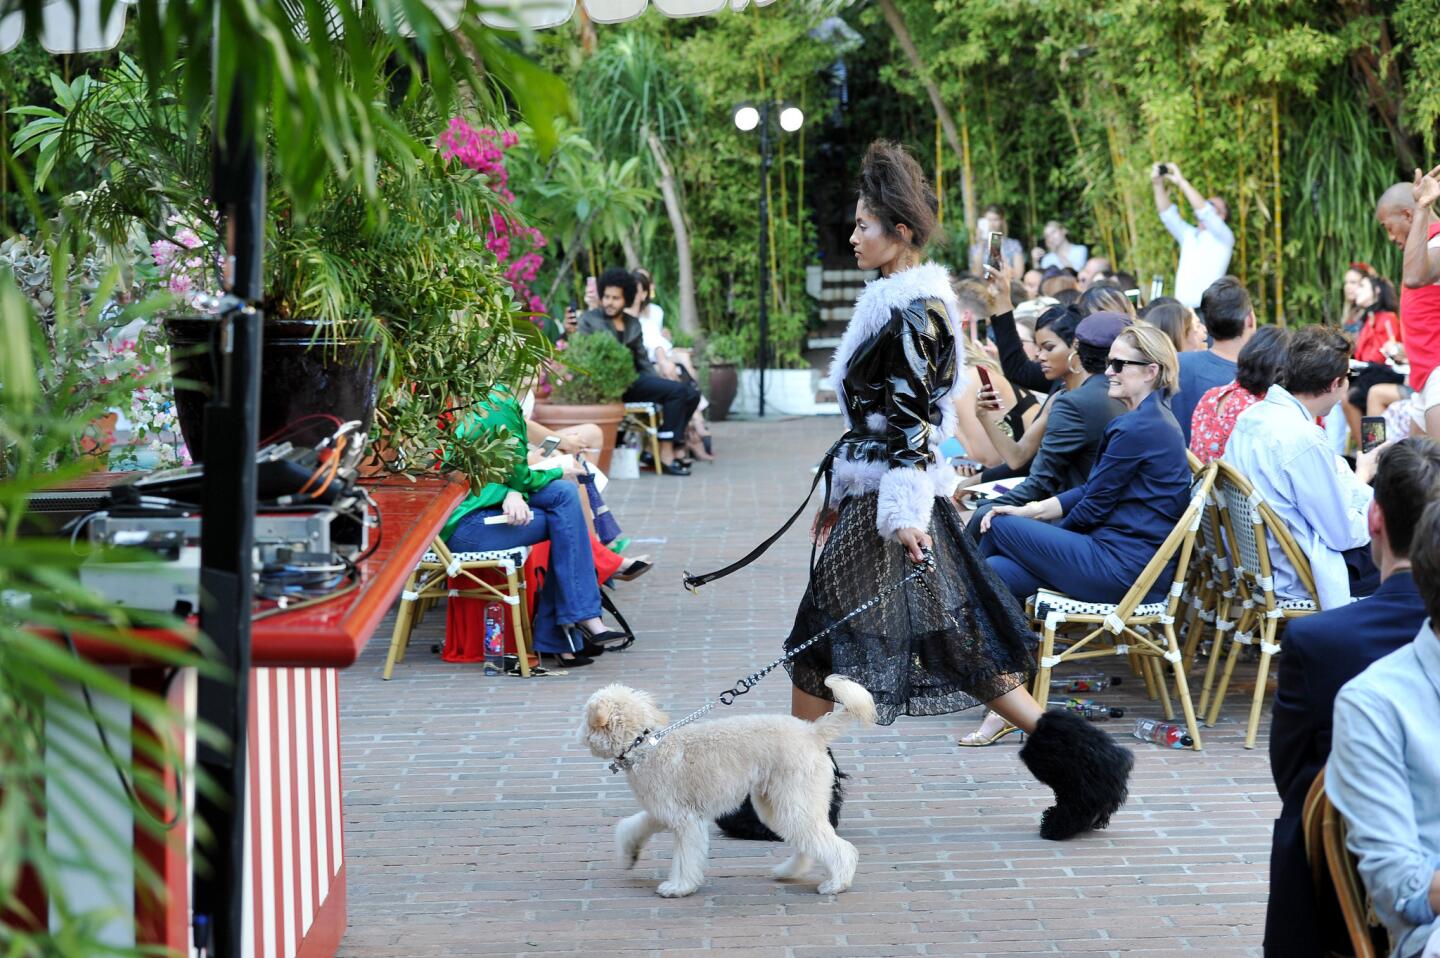 A model walks the dog in a look from CFDA/Vogue Fashion Fun finalist Sandy Liang's eponymous collection at the Oct. 25 event at the Chateau Marmont.